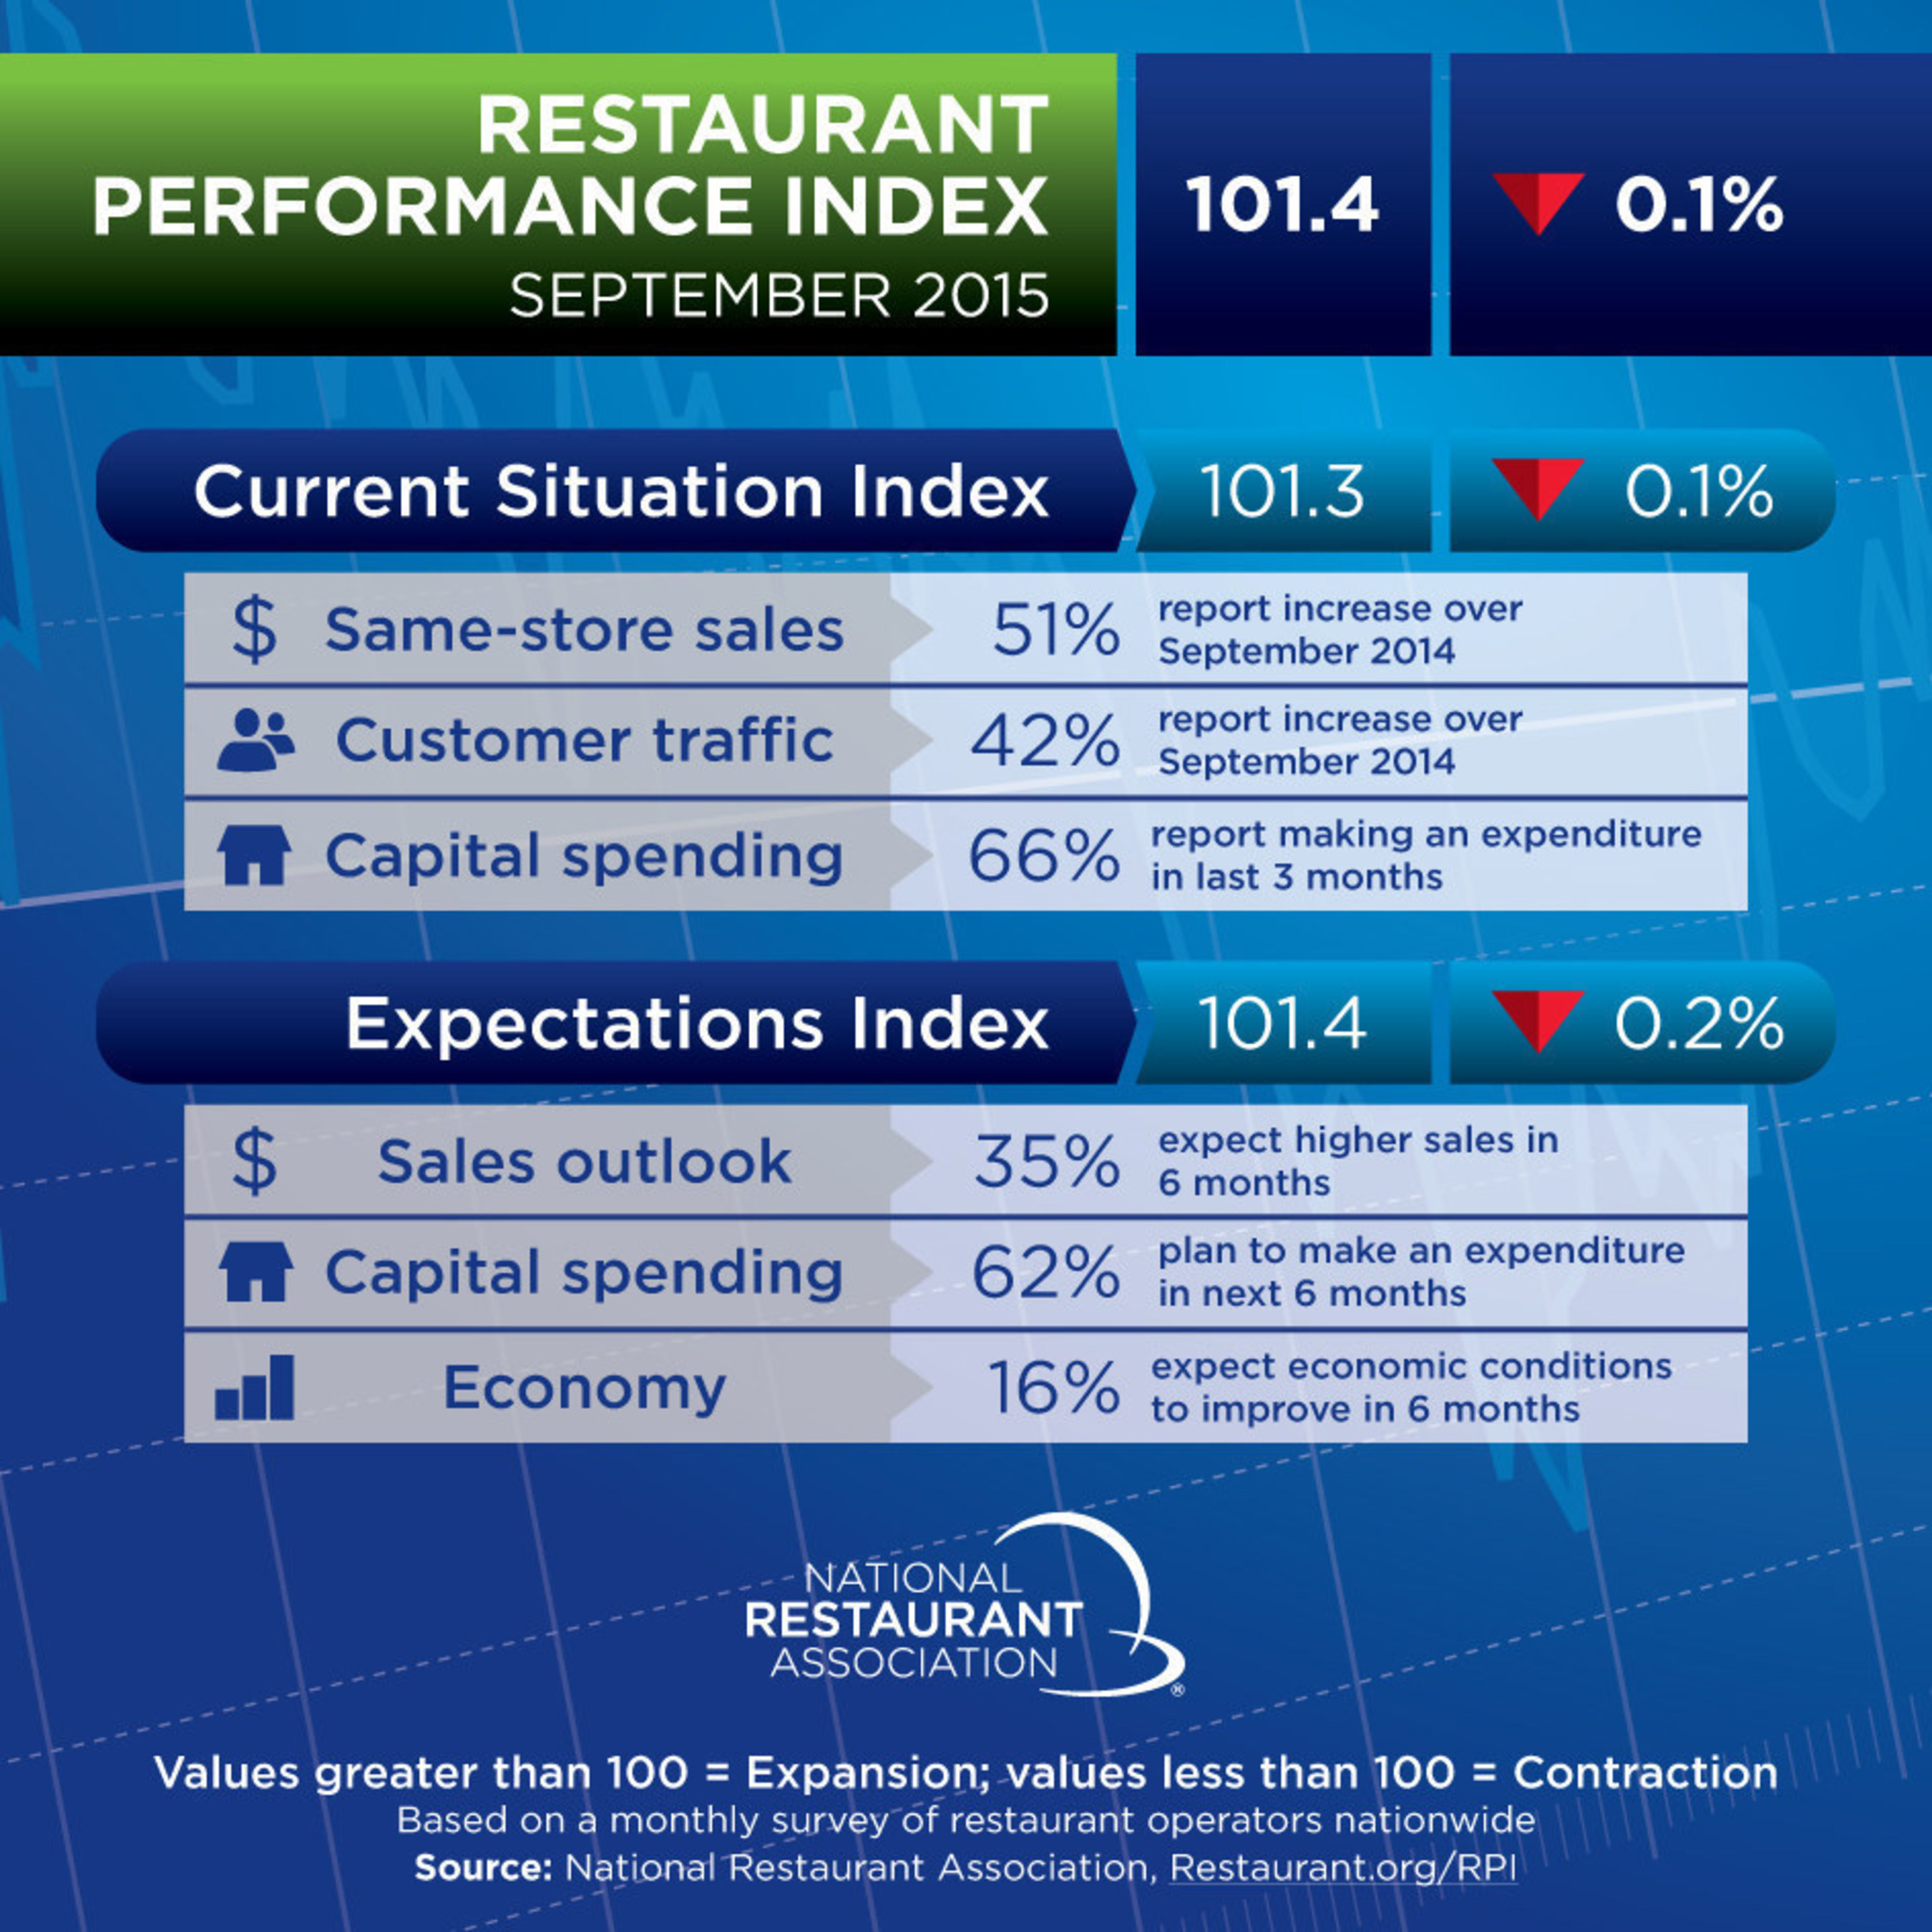 Although same-store sales and customer traffic remained positive in September, the National Restaurant Association's Restaurant Performance Index (RPI) registered a modest decline.  The RPI - a monthly composite index that tracks the health of and outlook for the U.S. restaurant industry - stood at 101.4 in September, down slightly from a level of 101.5 in August.